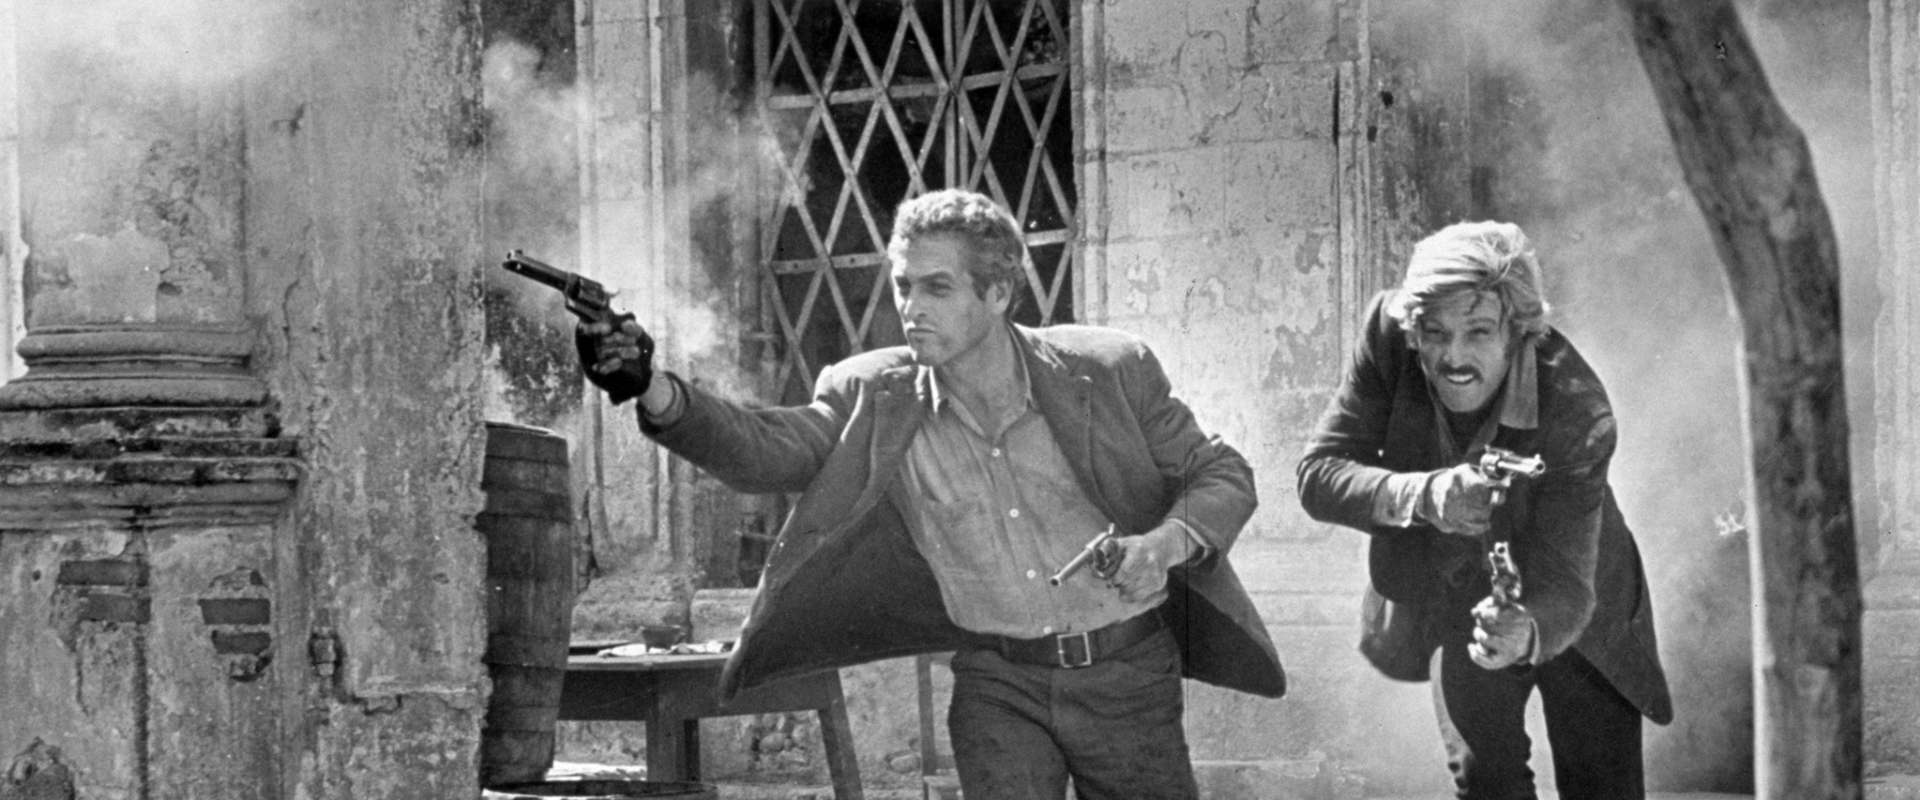 Butch Cassidy and the Sundance Kid background 2